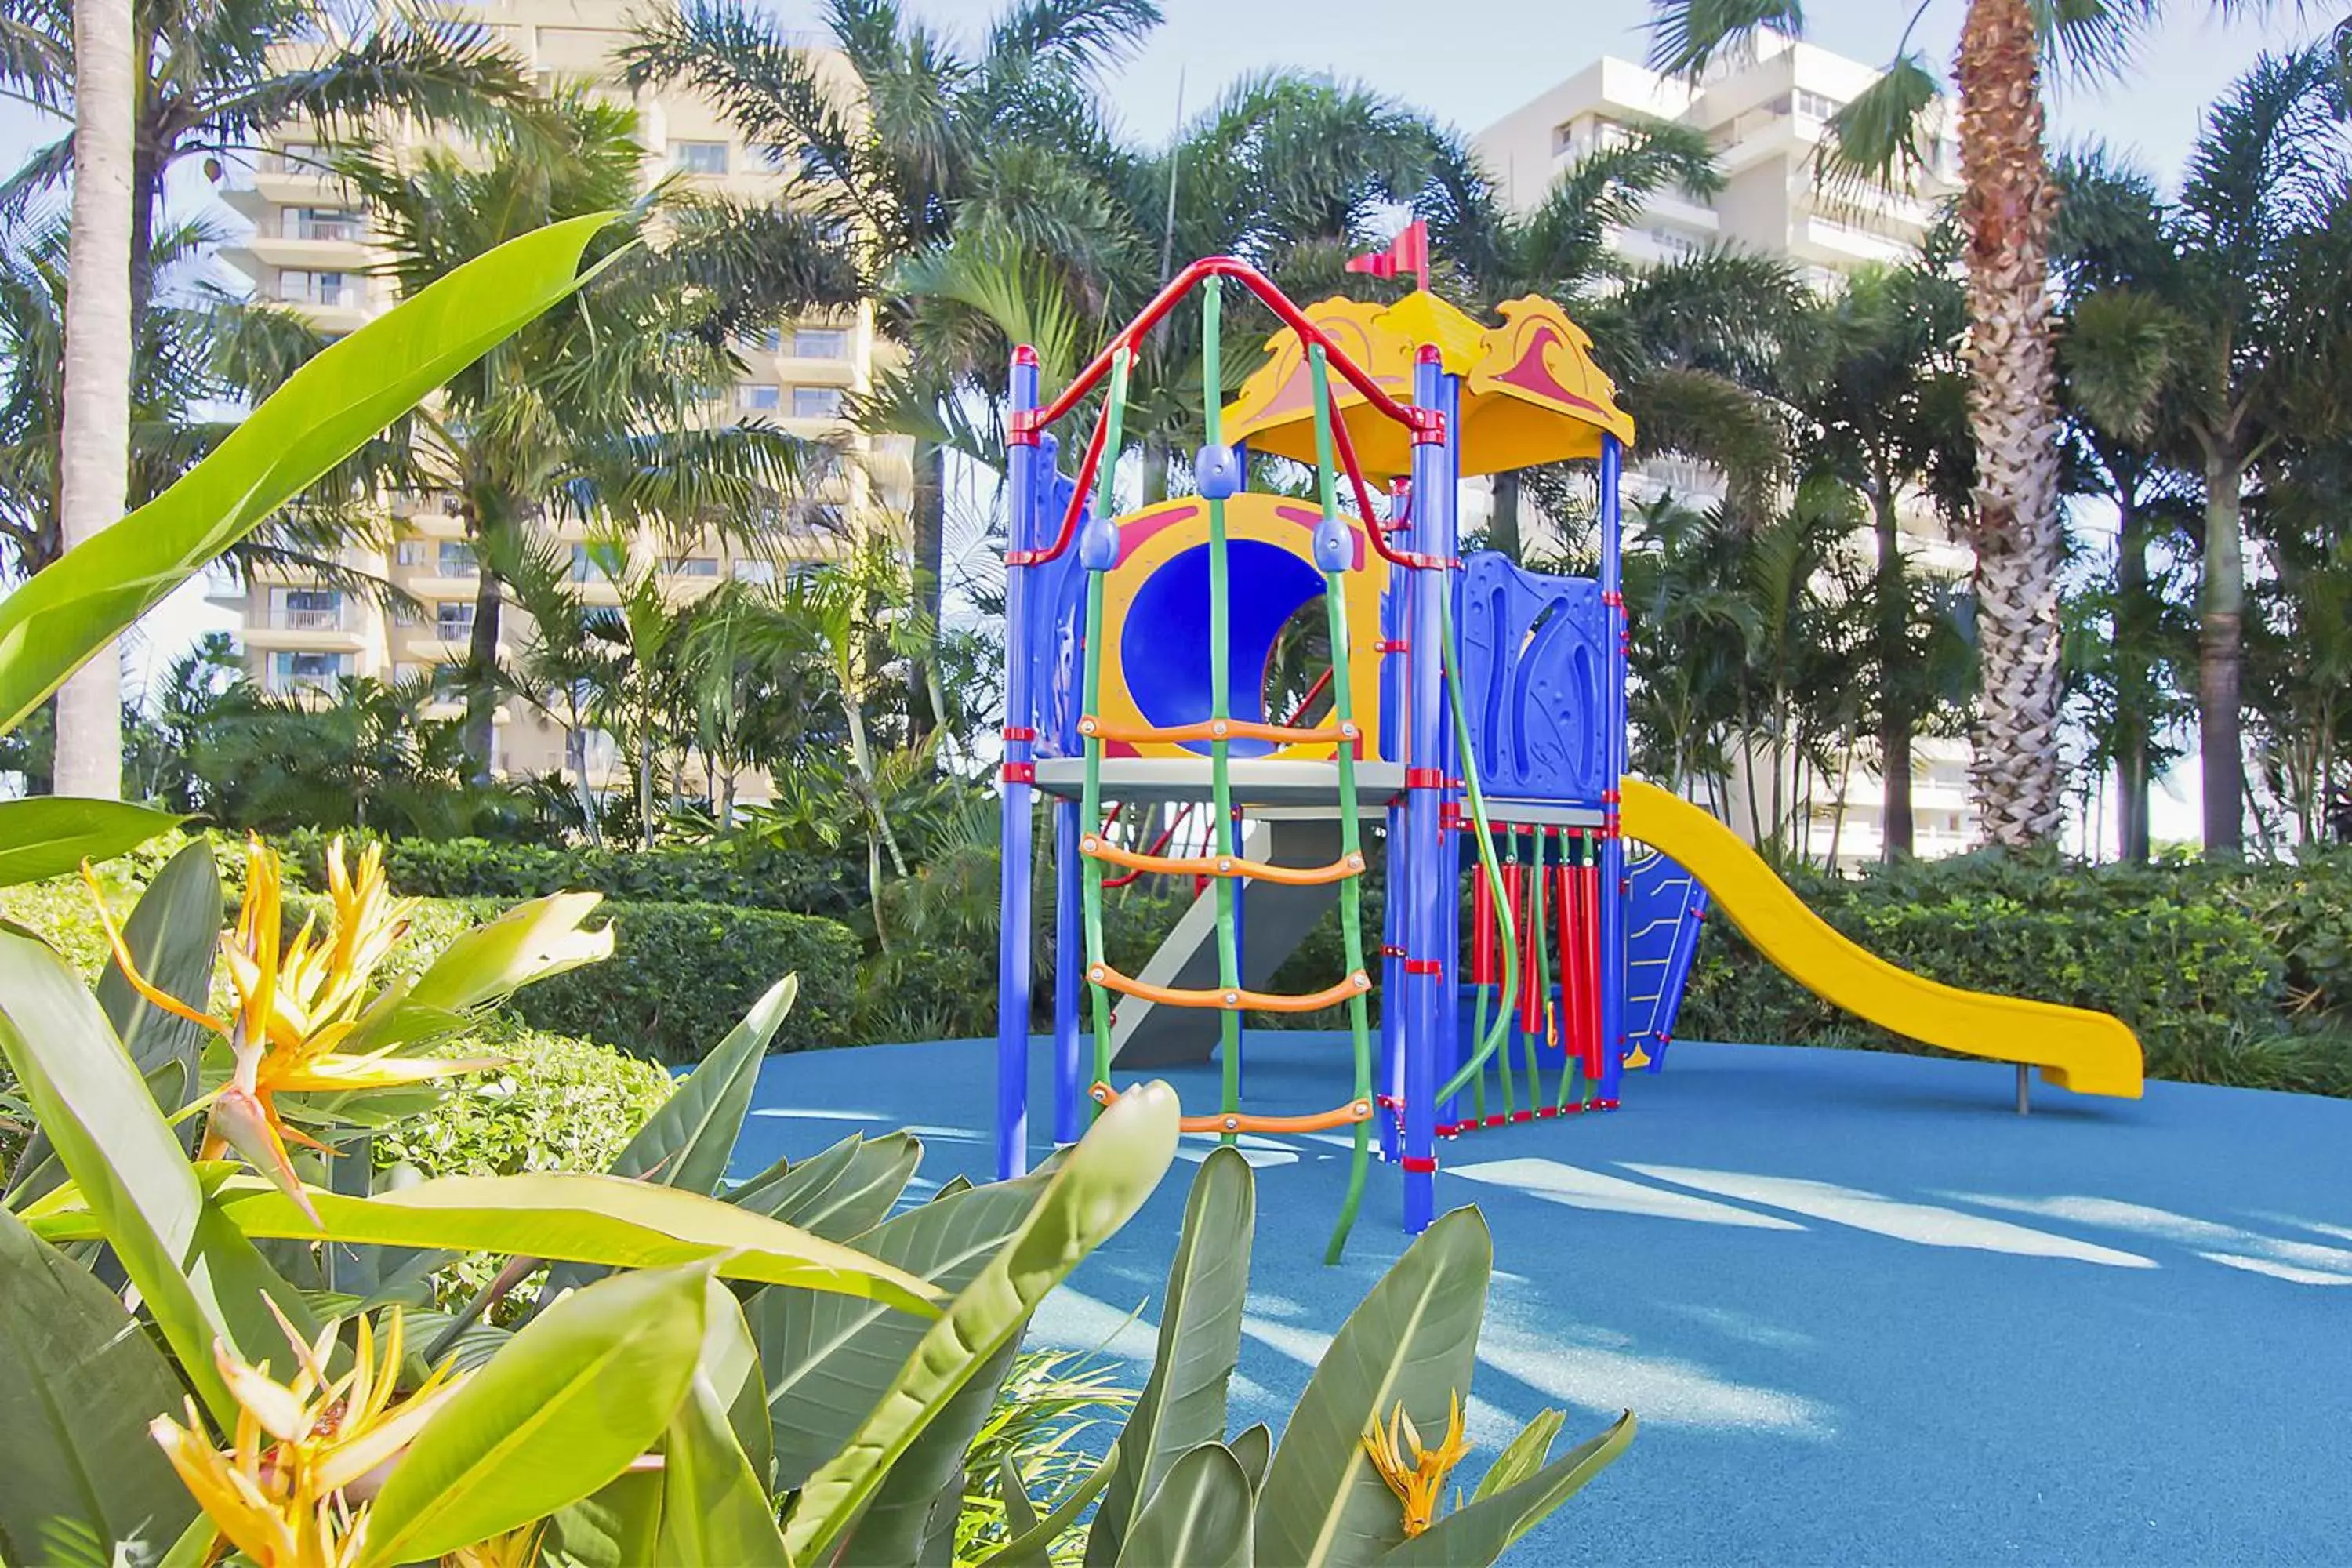 Children play ground, Children's Play Area in Mantra Towers of Chevron